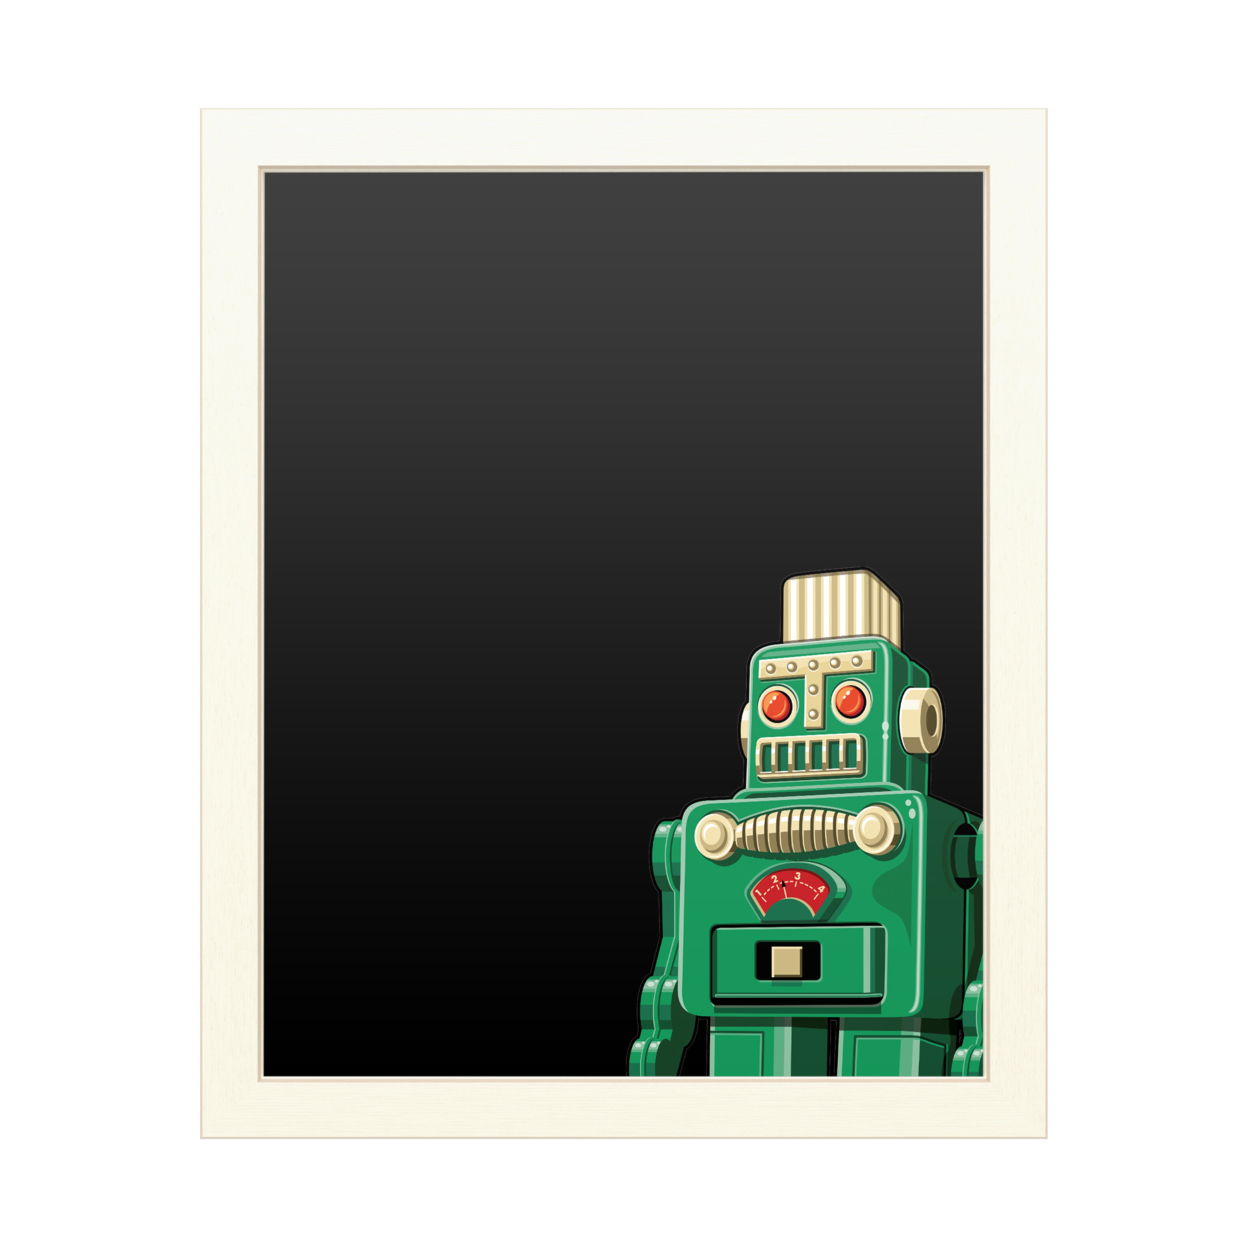 16 X 20 Chalk Board With Printed Artwork - Ron Magnes Vintage Green Robot White Board - Ready To Hang Chalkboard